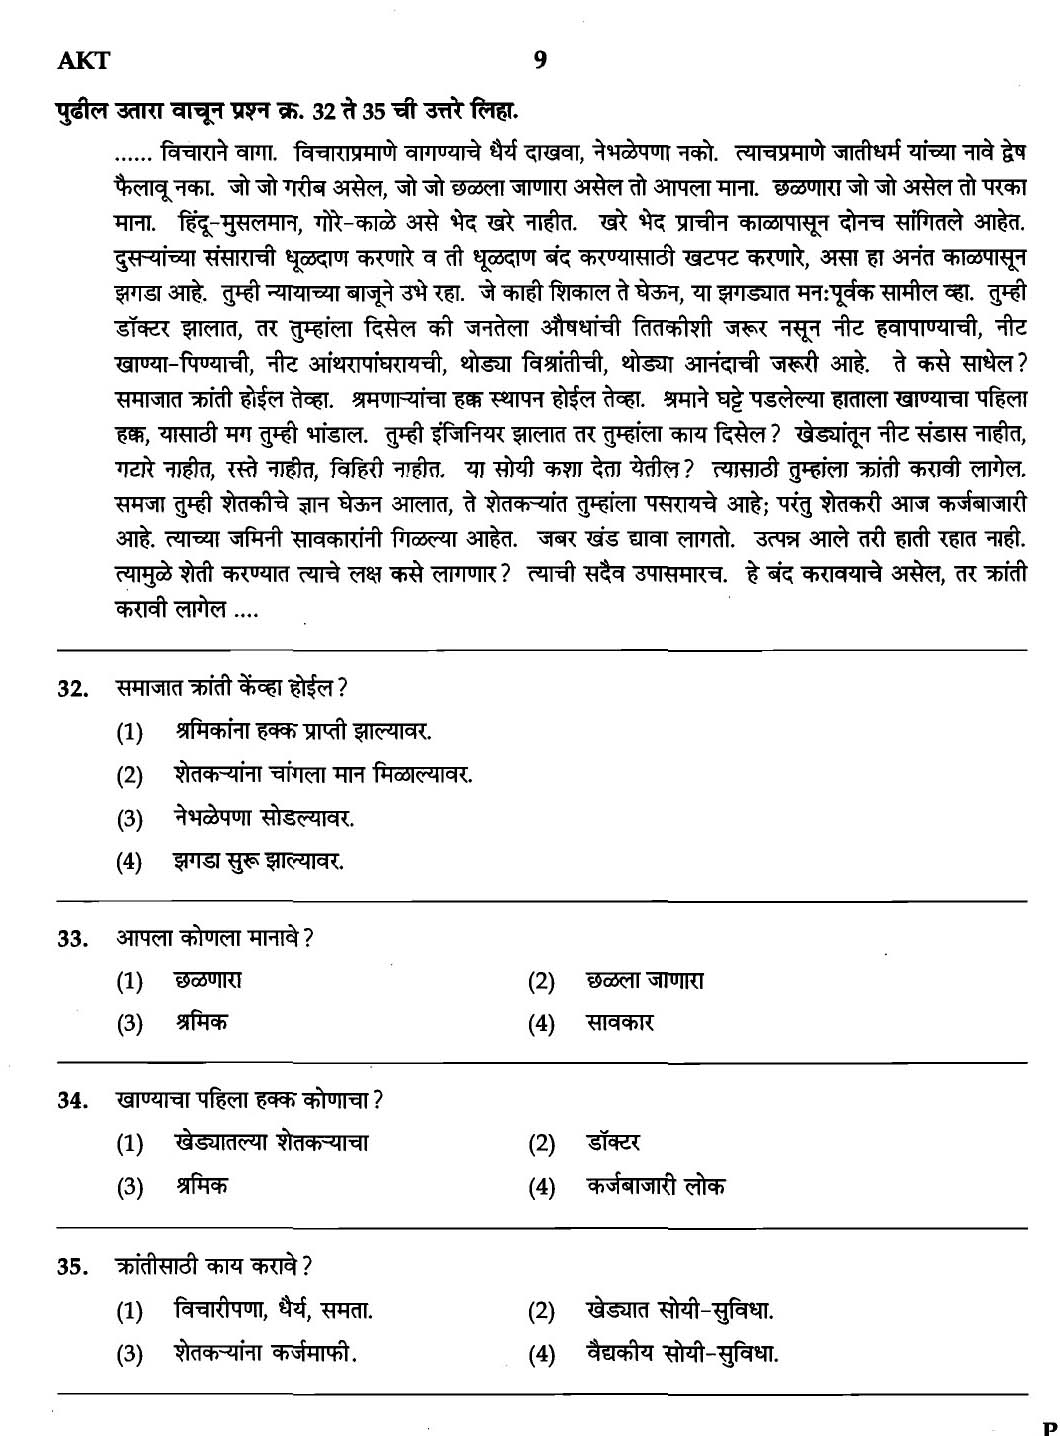 MPSC Agricultural Services Exam 2007 General Question Paper 7